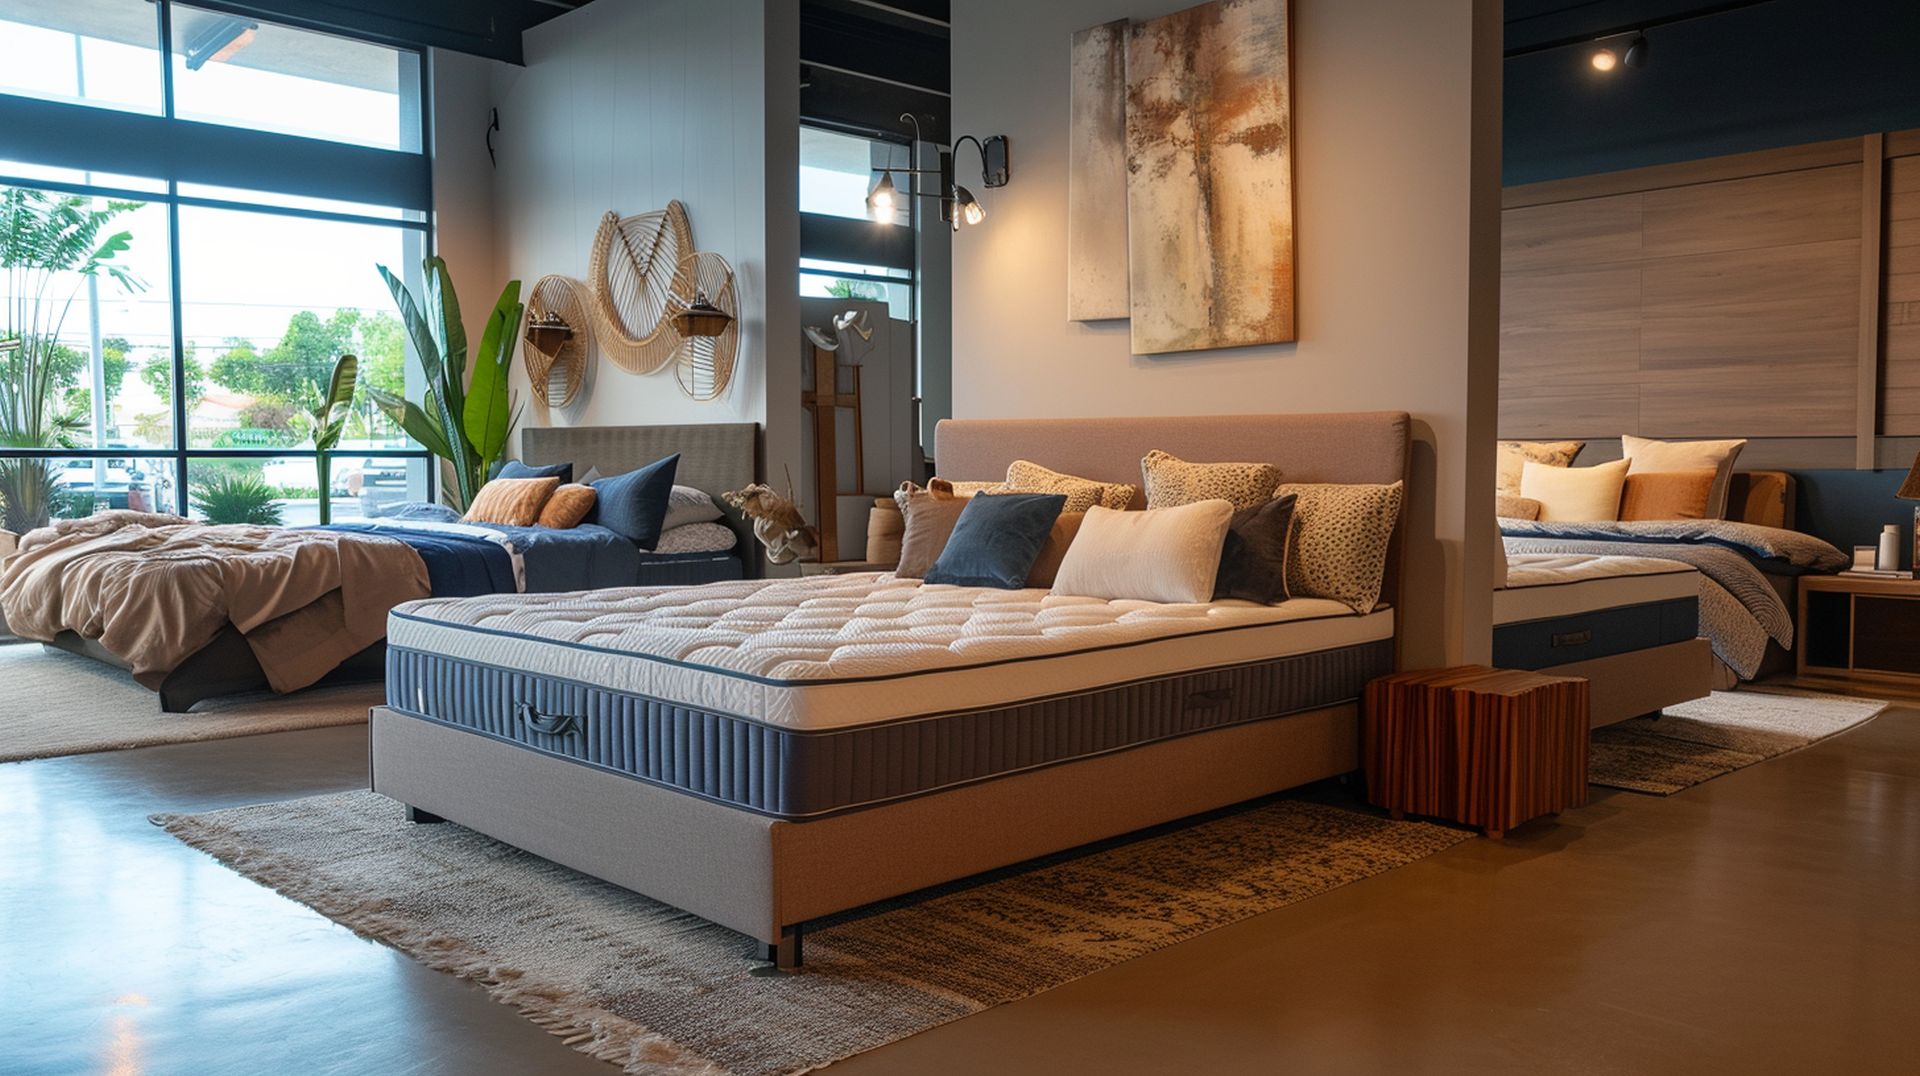 If you're looking for a new bed, mattress stores in Norwalk offer the best customer and delivery service, financing, and warranties in Connecticut